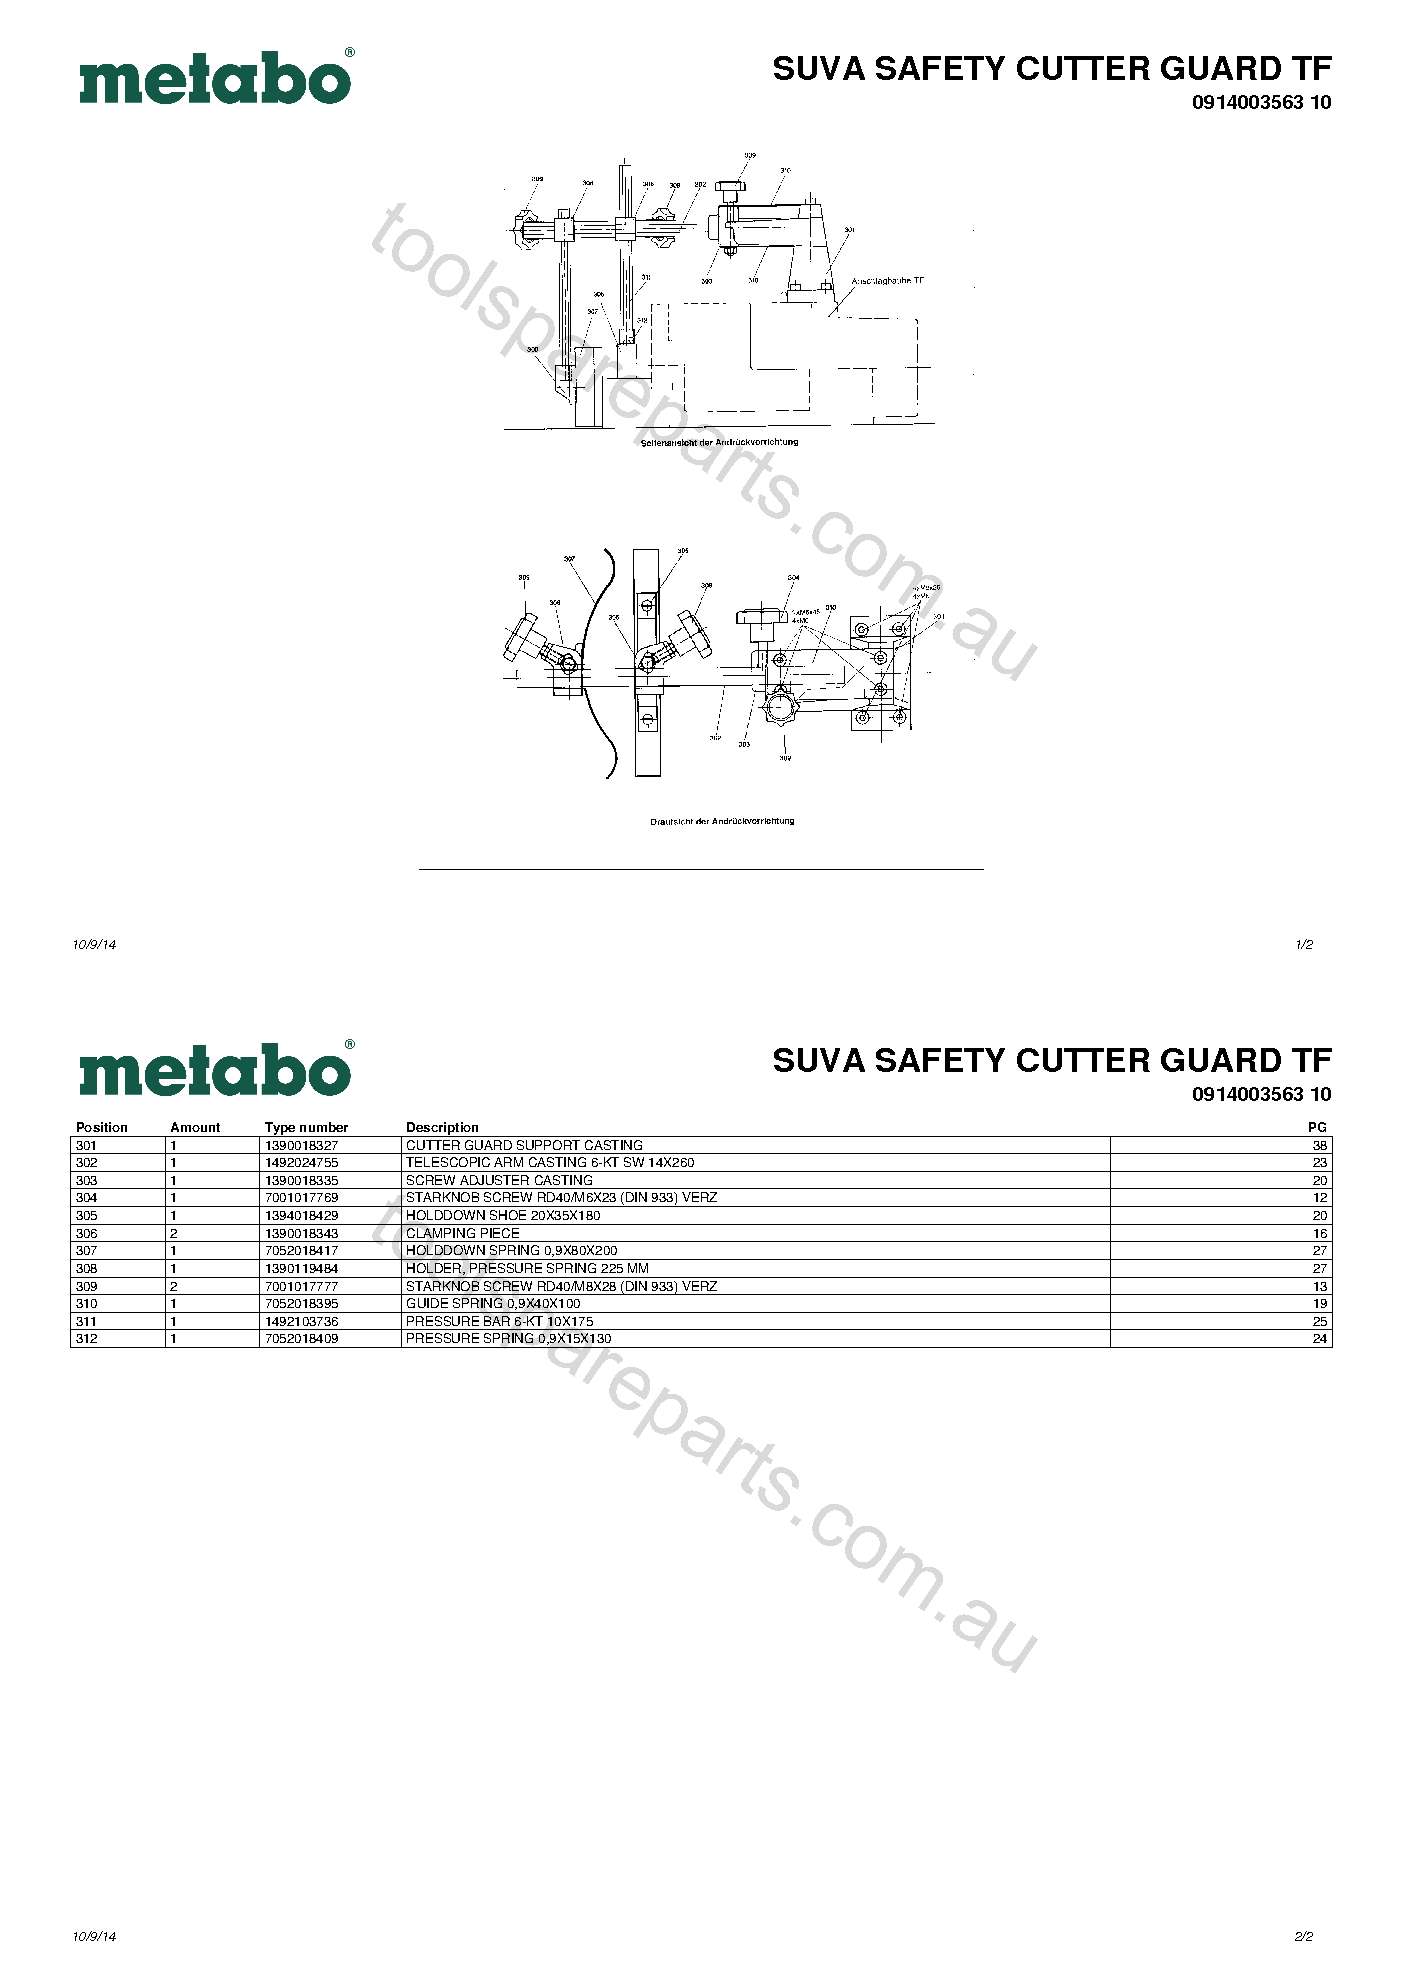 Metabo SUVA SAFETY CUTTER GUARD TF 0914003563 10  Diagram 1